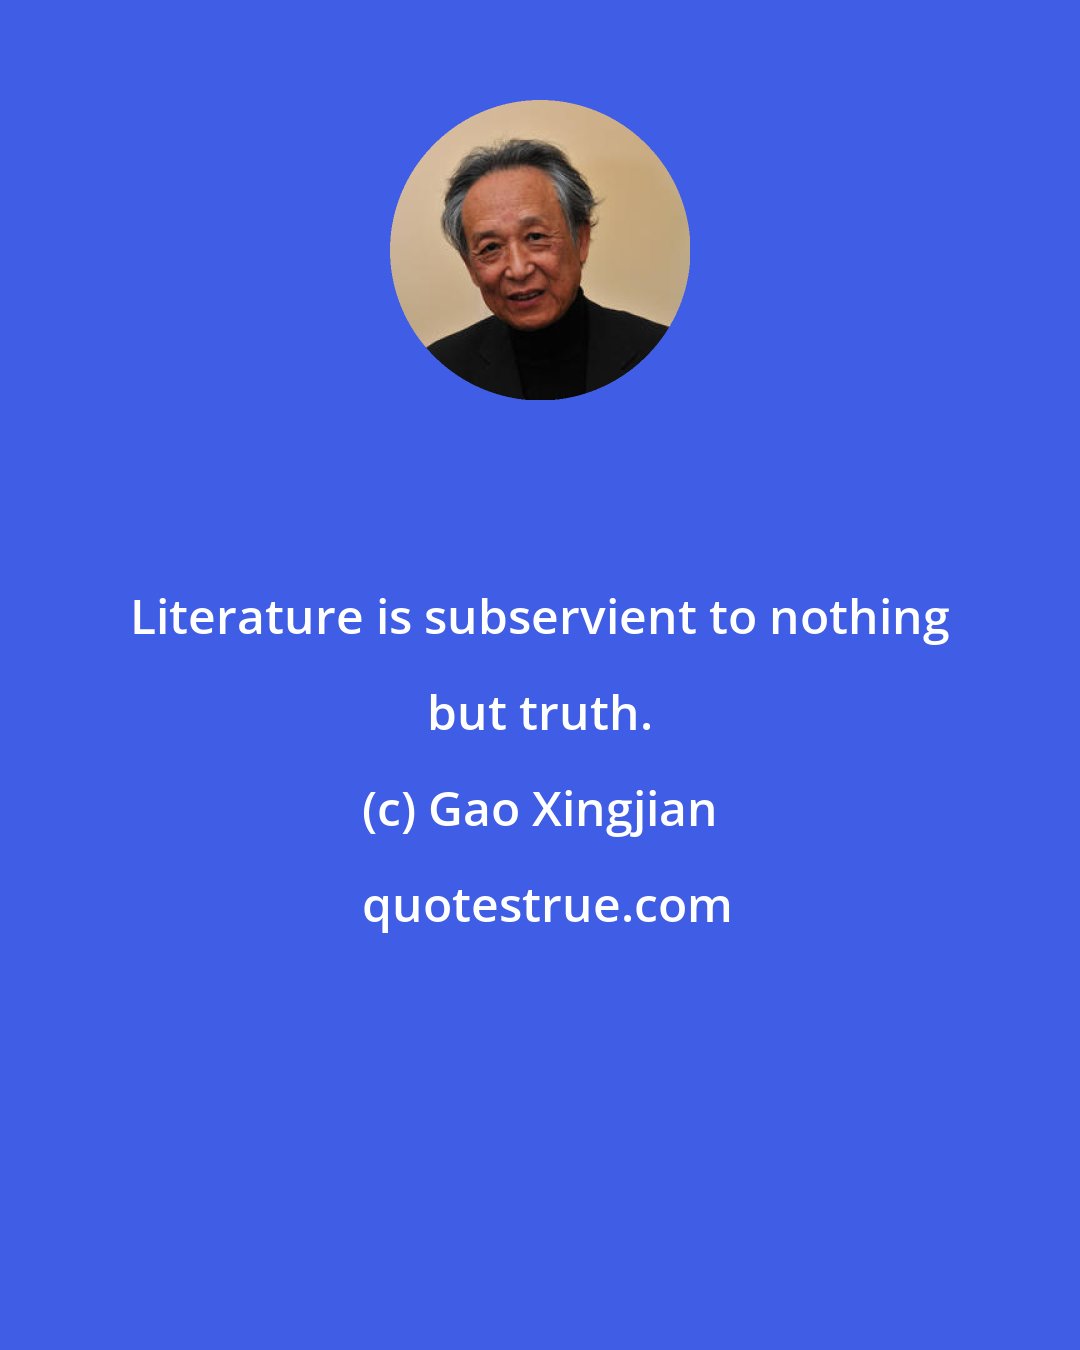 Gao Xingjian: Literature is subservient to nothing but truth.